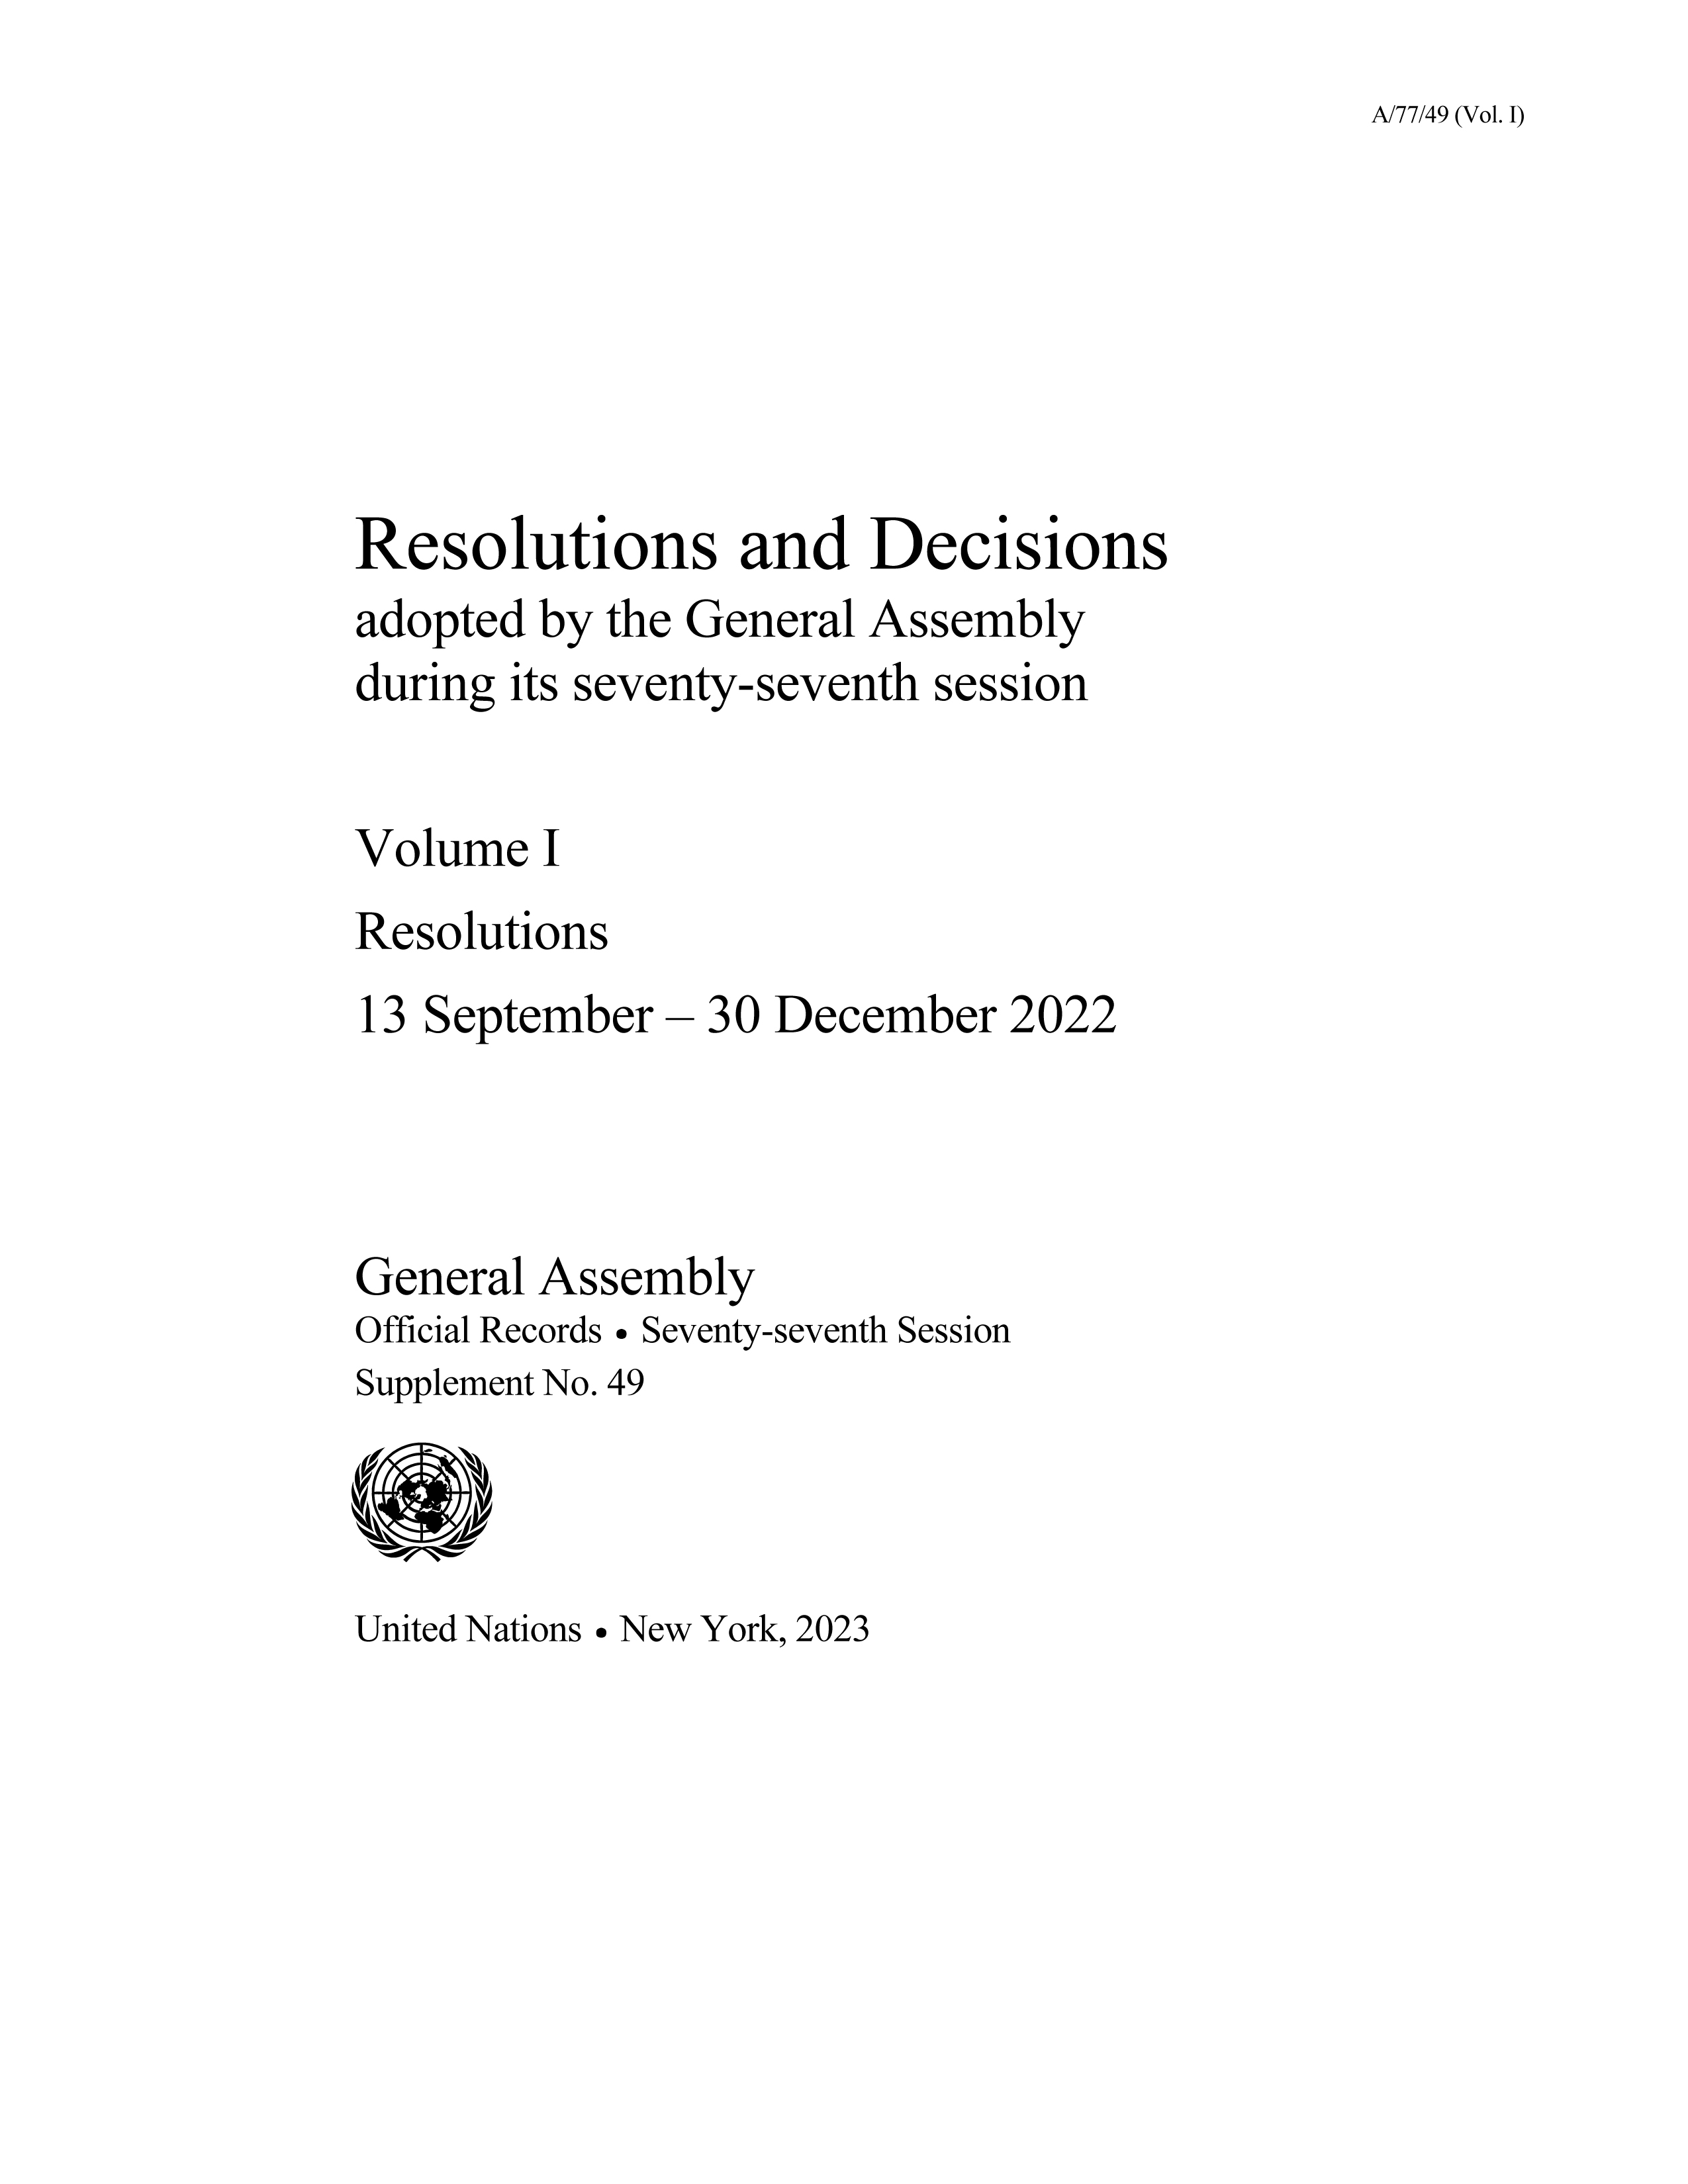 image of Resolutions and Decisions Adopted by the General Assembly During its Seventy-seventh Session: Volume I